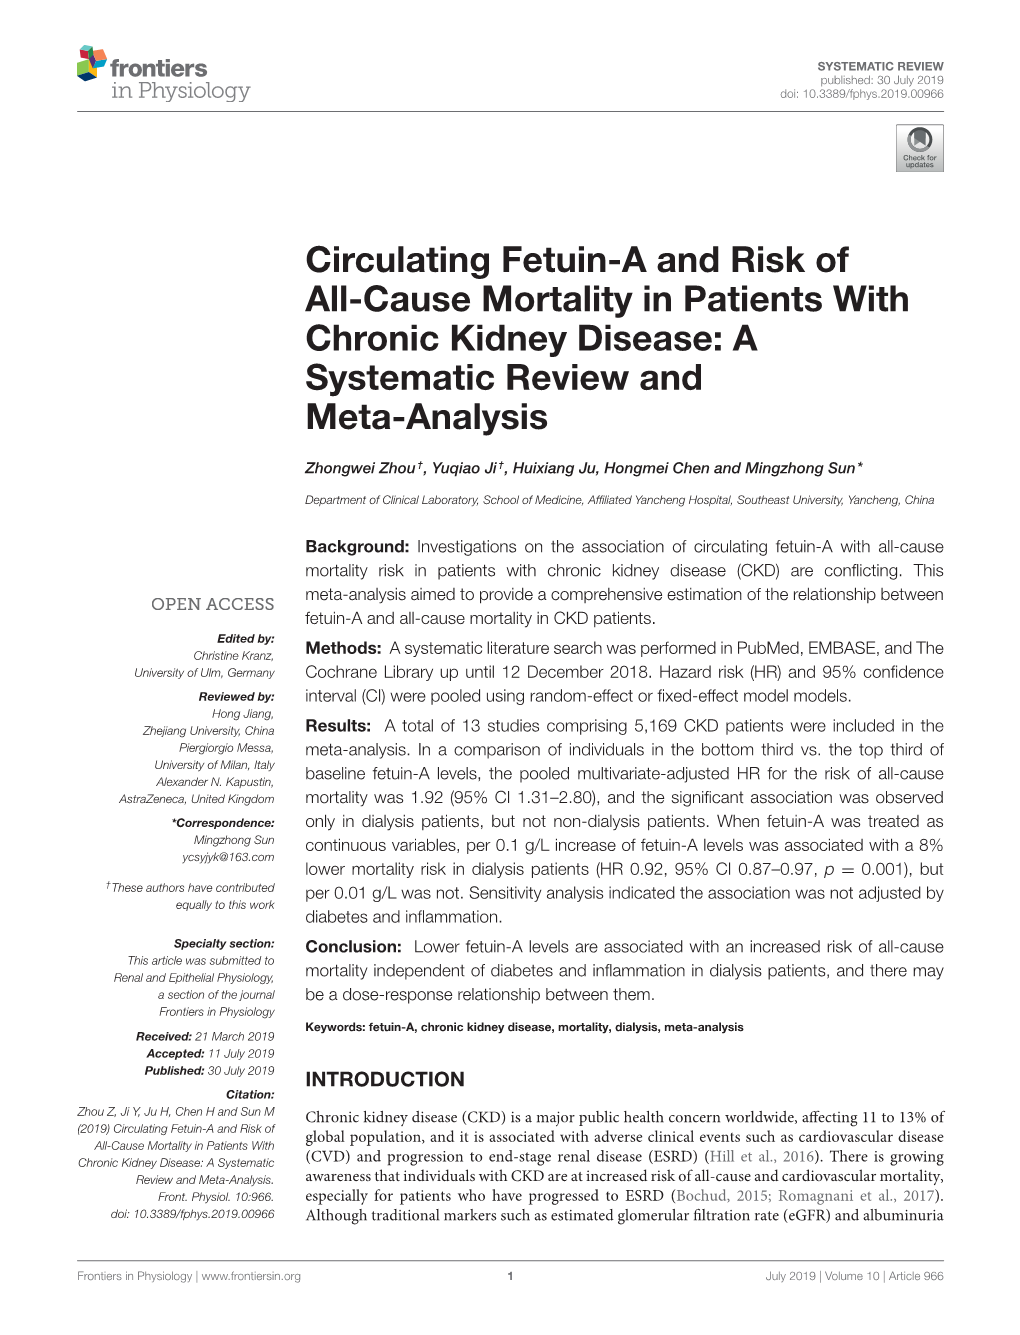 Circulating Fetuin-A and Risk of All-Cause Mortality in Patients with Chronic Kidney Disease: a Systematic Review and Meta-Analysis